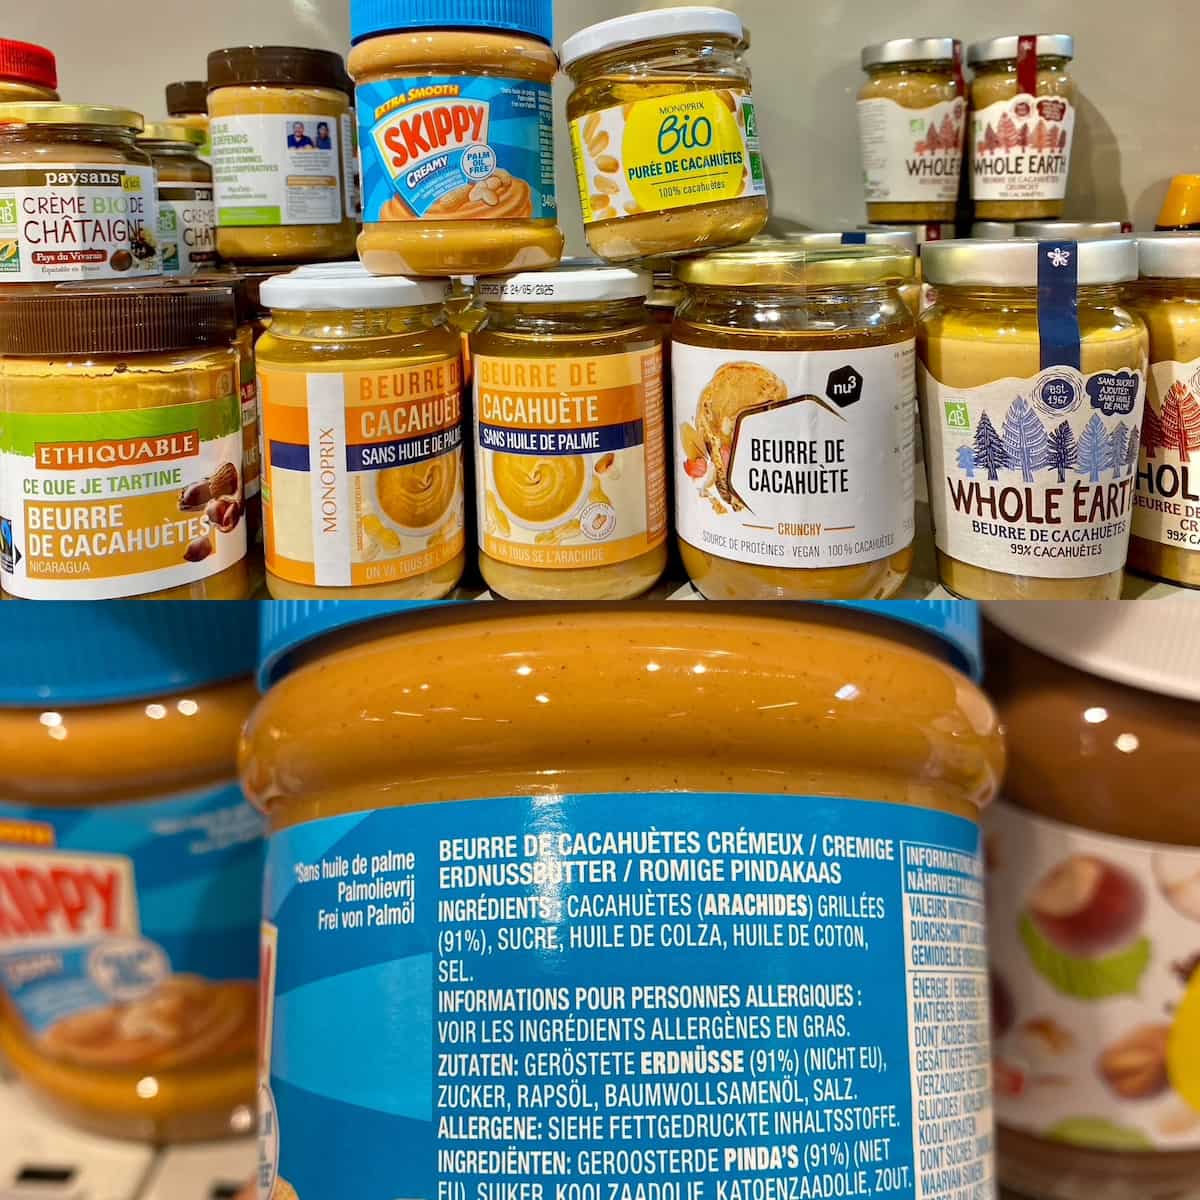 various brands of peanut butter jars, with sugar and extra oils added to some brands